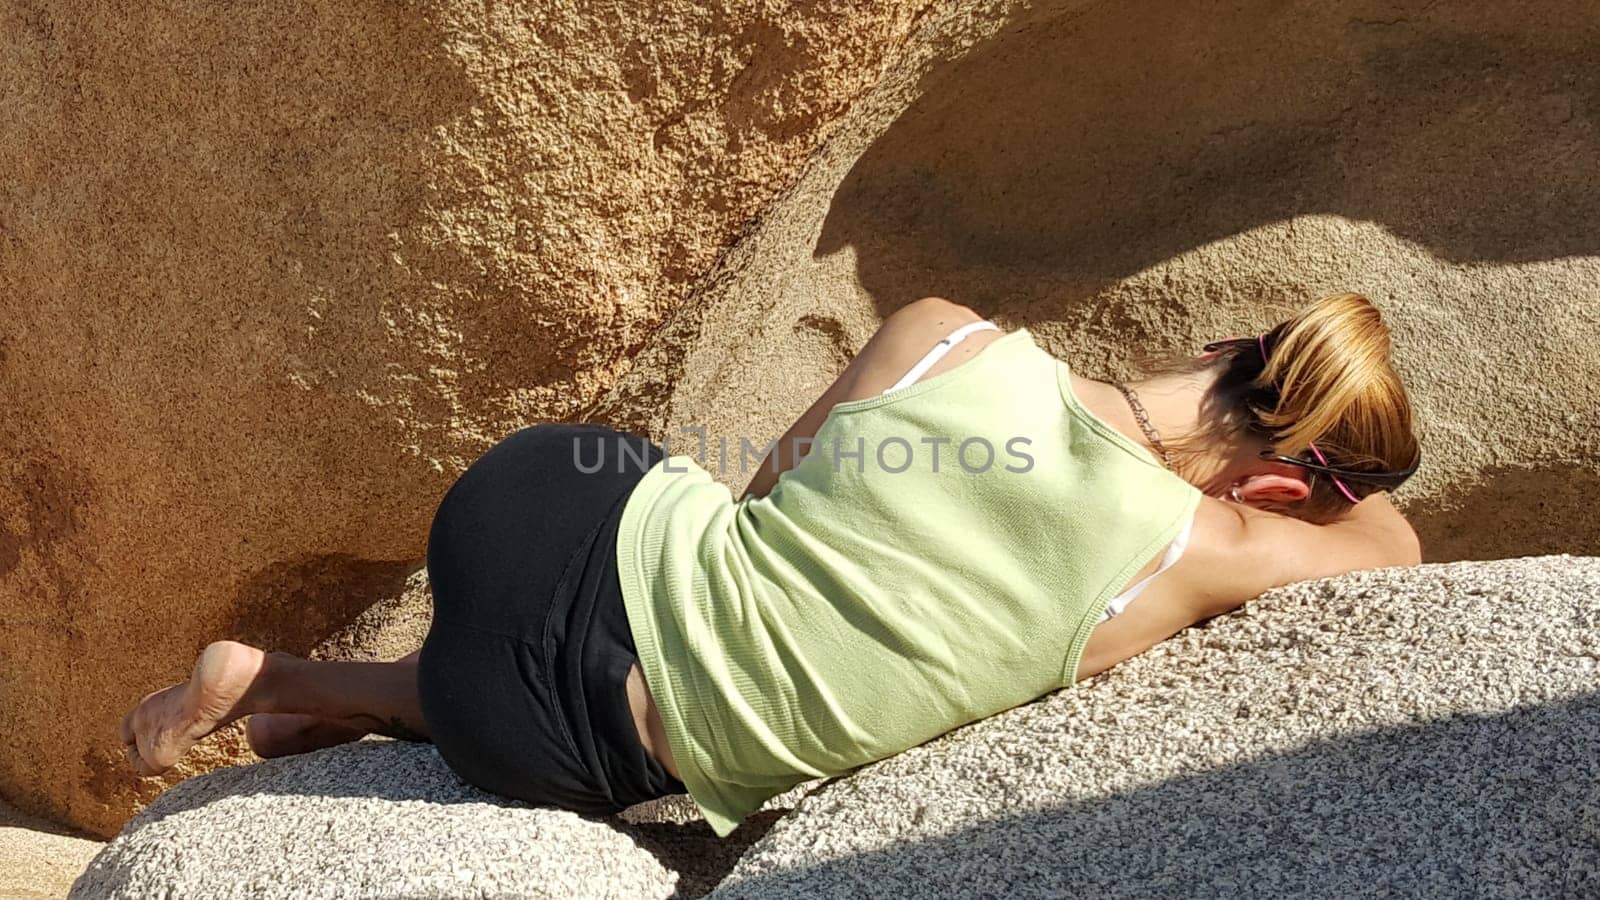 Back View of Fit Woman in Yoga Pants and Tank Top with Ponytail, Tired from Hiking, Laying on Boulders. High quality photo